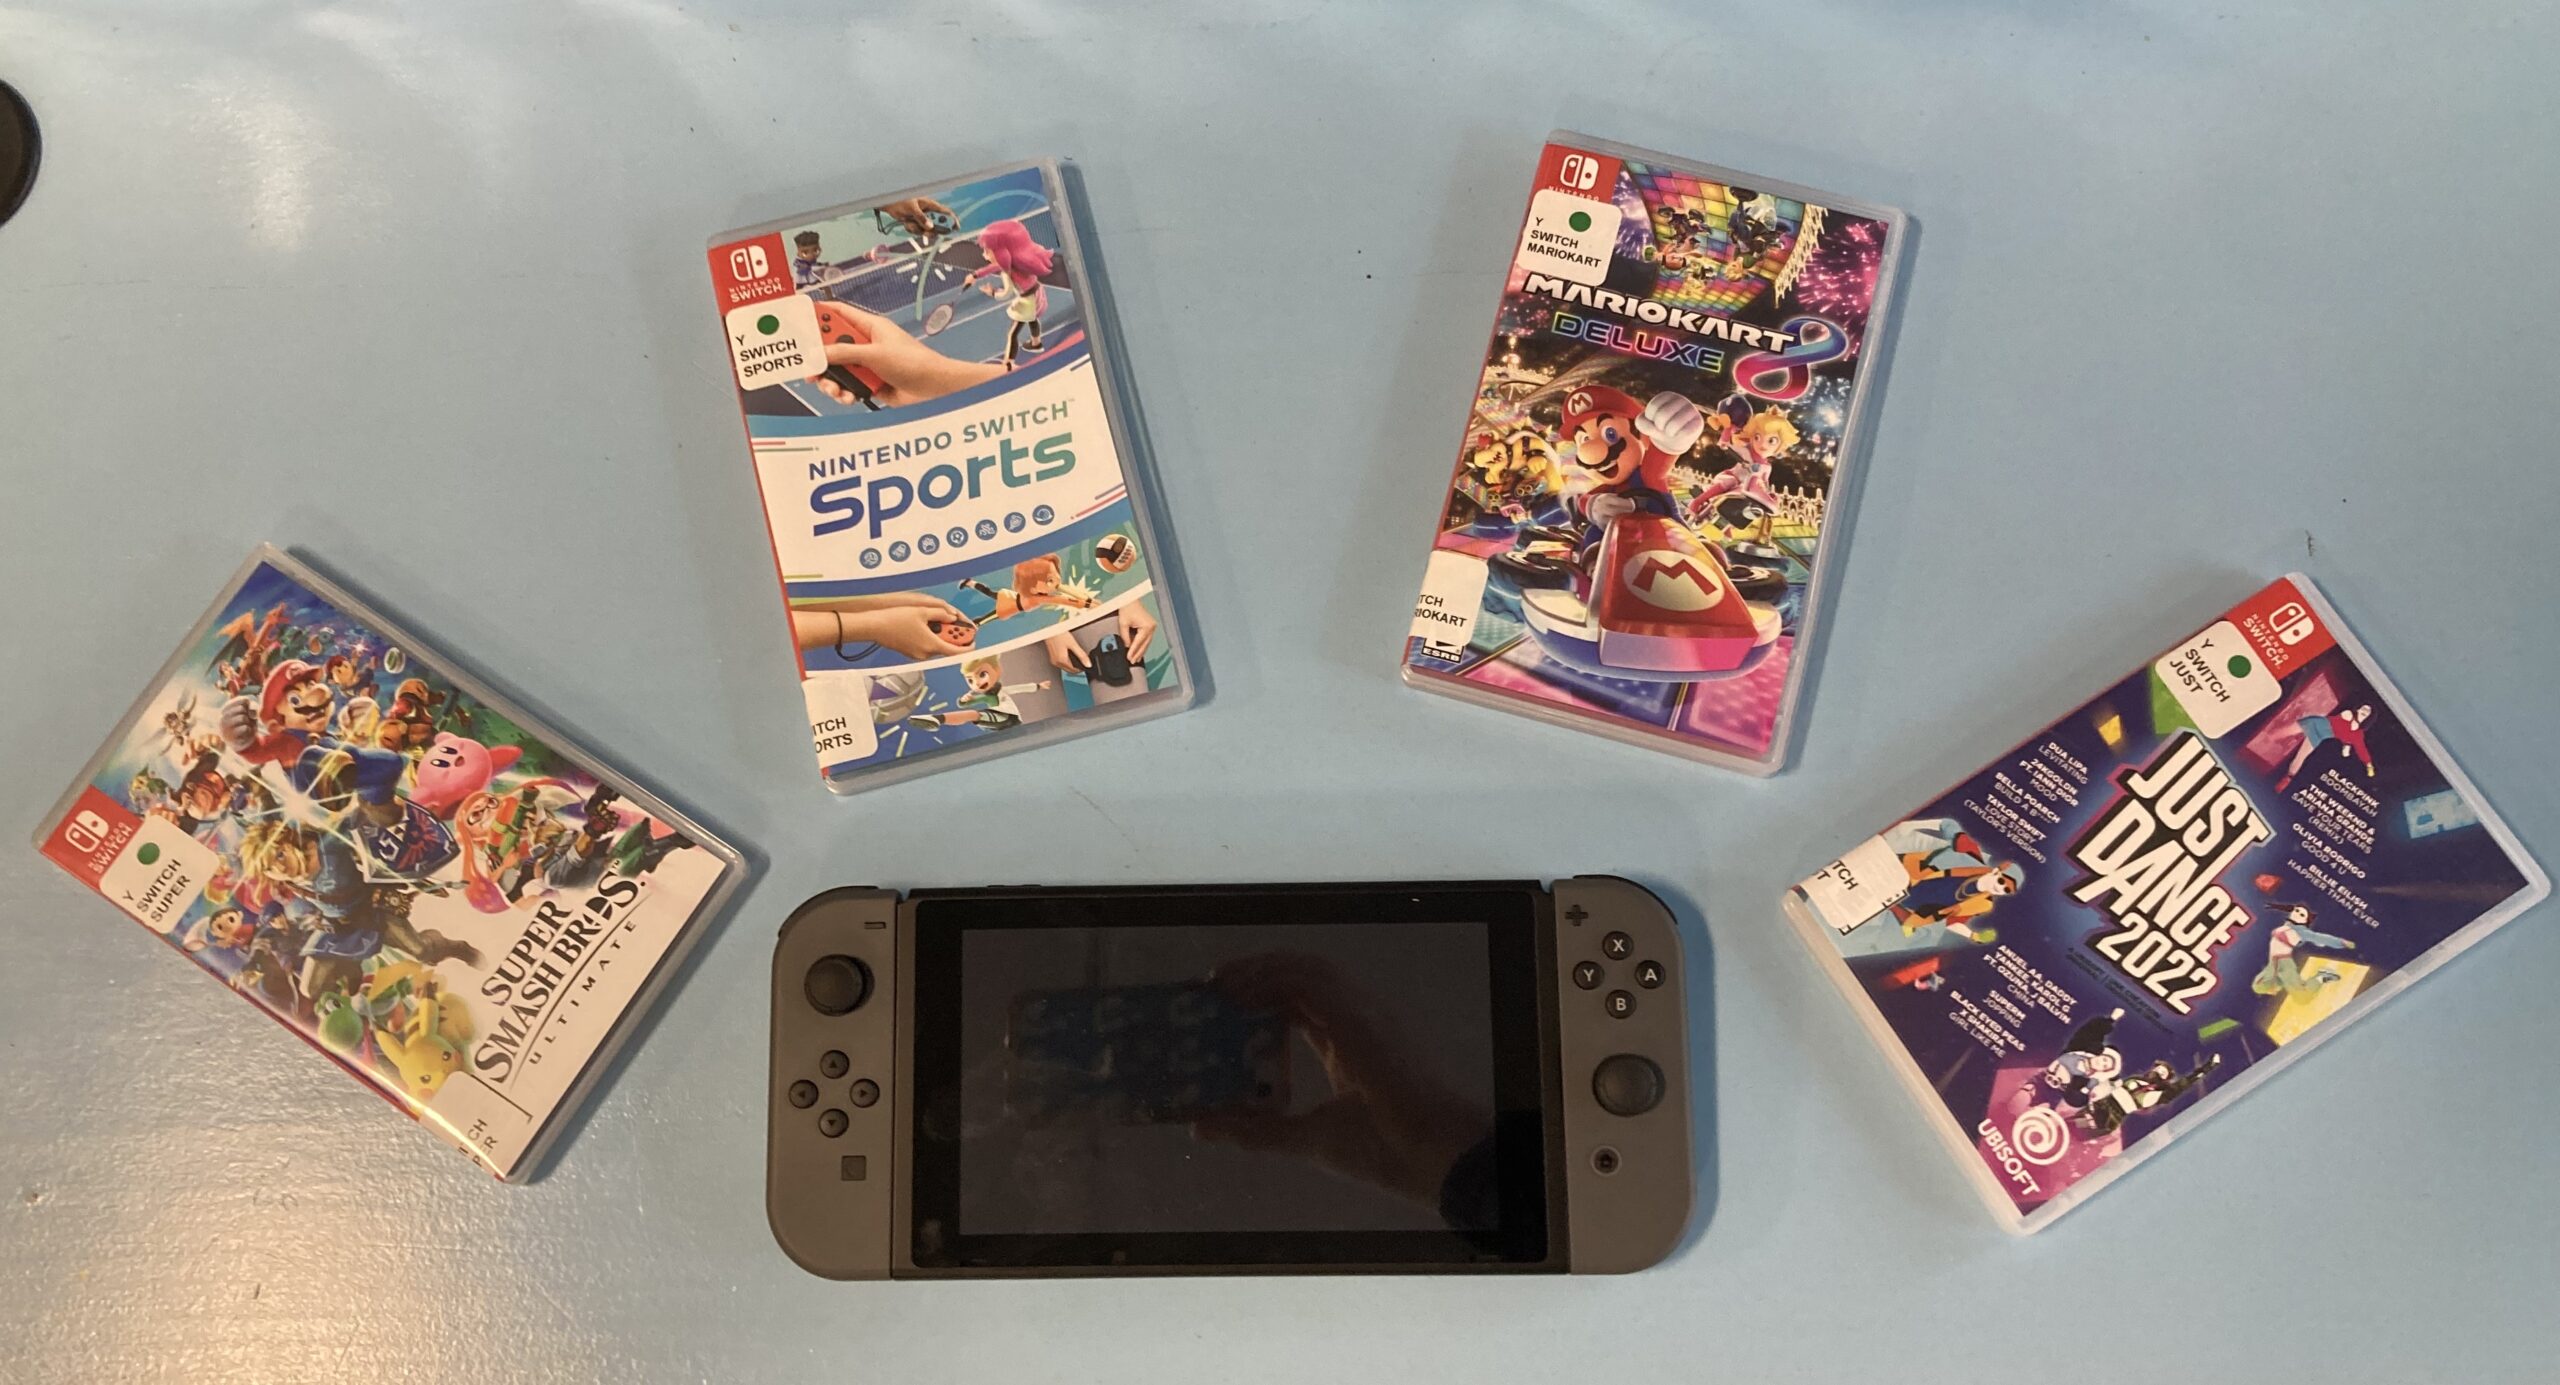 A black Nintendo Switch lies against a blue table. Fanned out around it are various games, including Just Dance and Mario Kart.